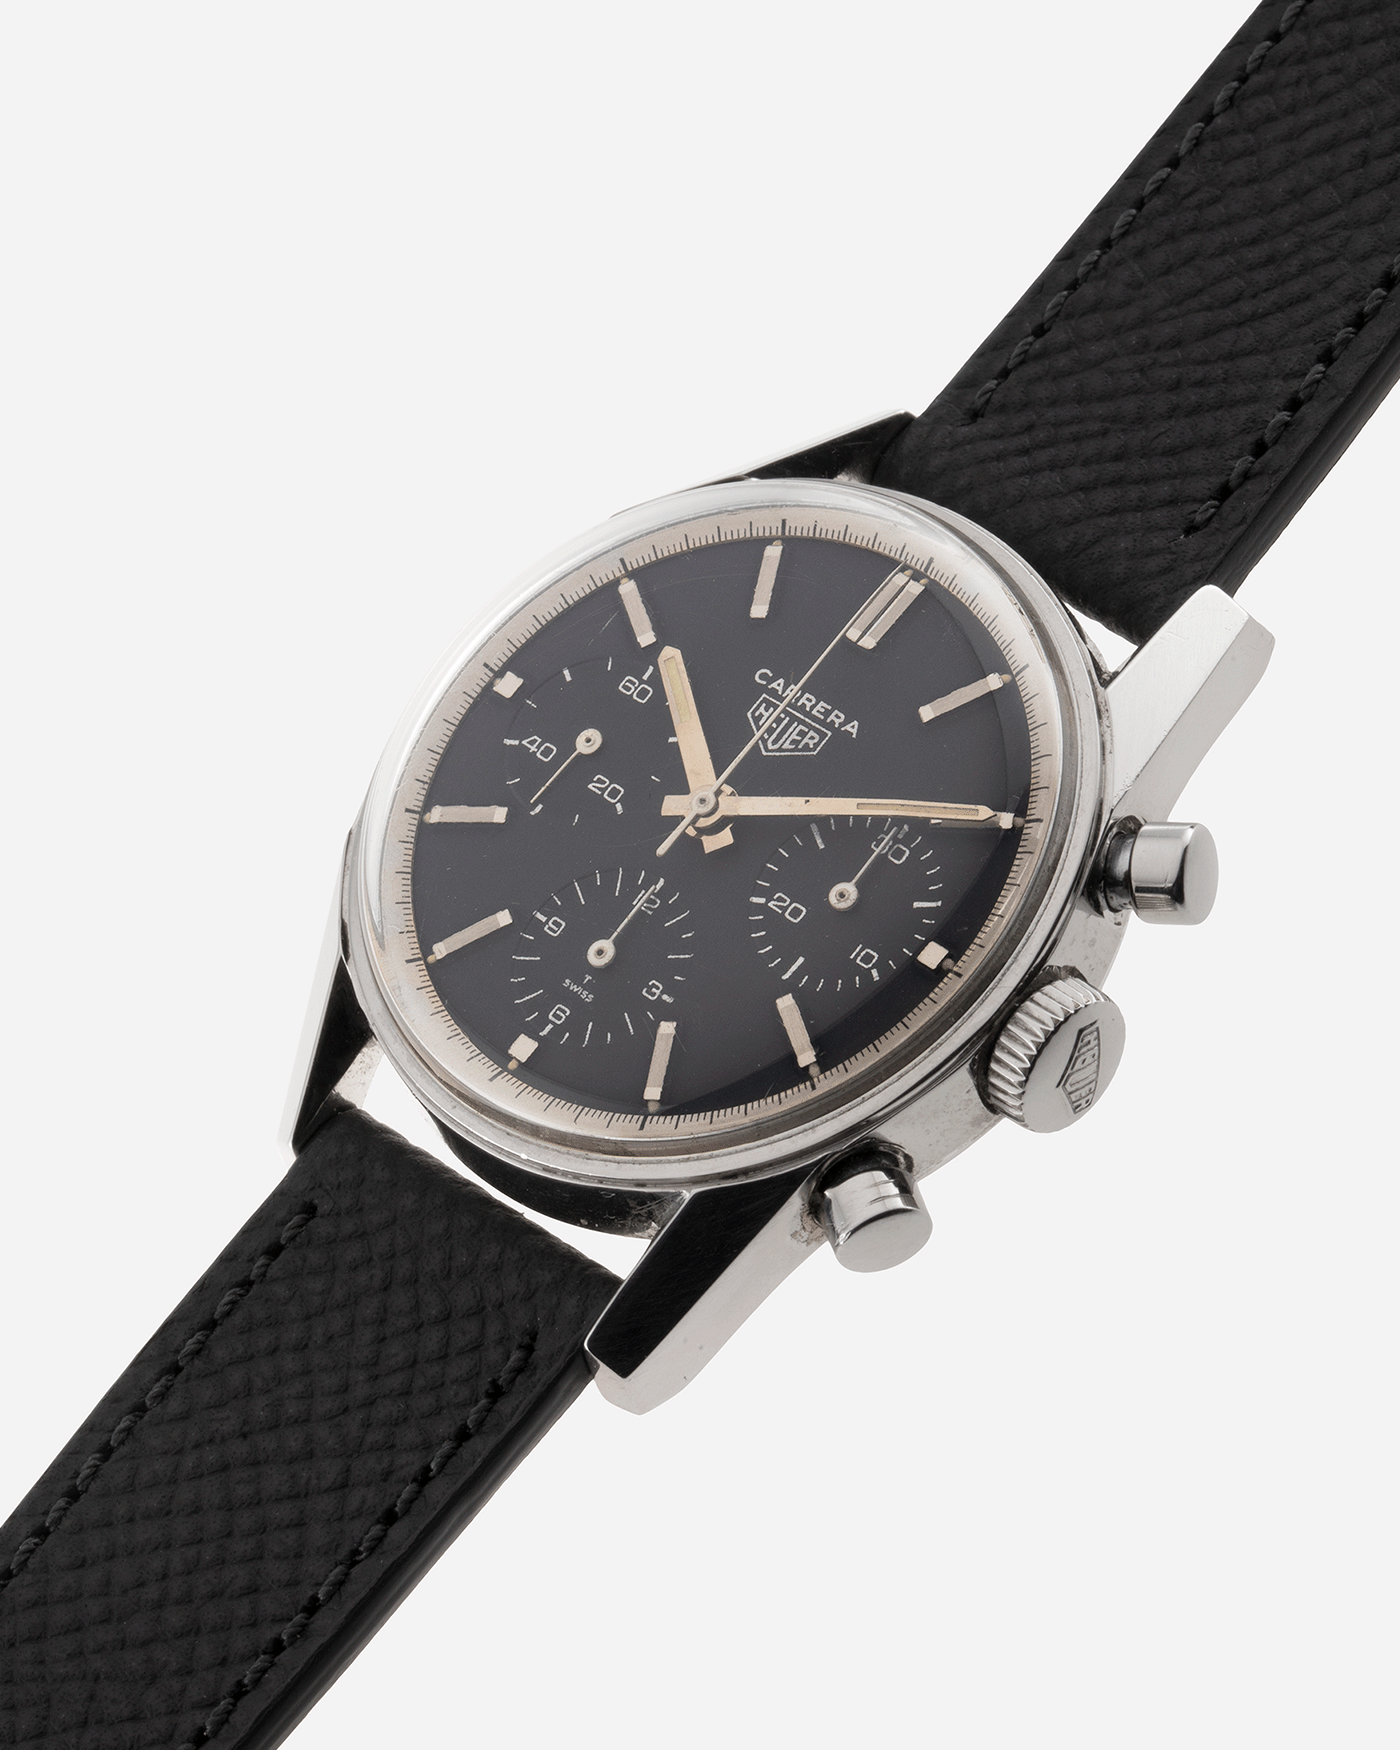 Brand: Heuer Year: 1960’s Model: Carrera Reference Number: 2447N Serial Number: 78XXX Material: Stainless Steel Movement: Valjoux 72 Case Diameter: 36mm Lug Width: 18mm Bracelet/Strap: Molequin Anthracite Textured Calf with Stainless Steel Tang Buckle